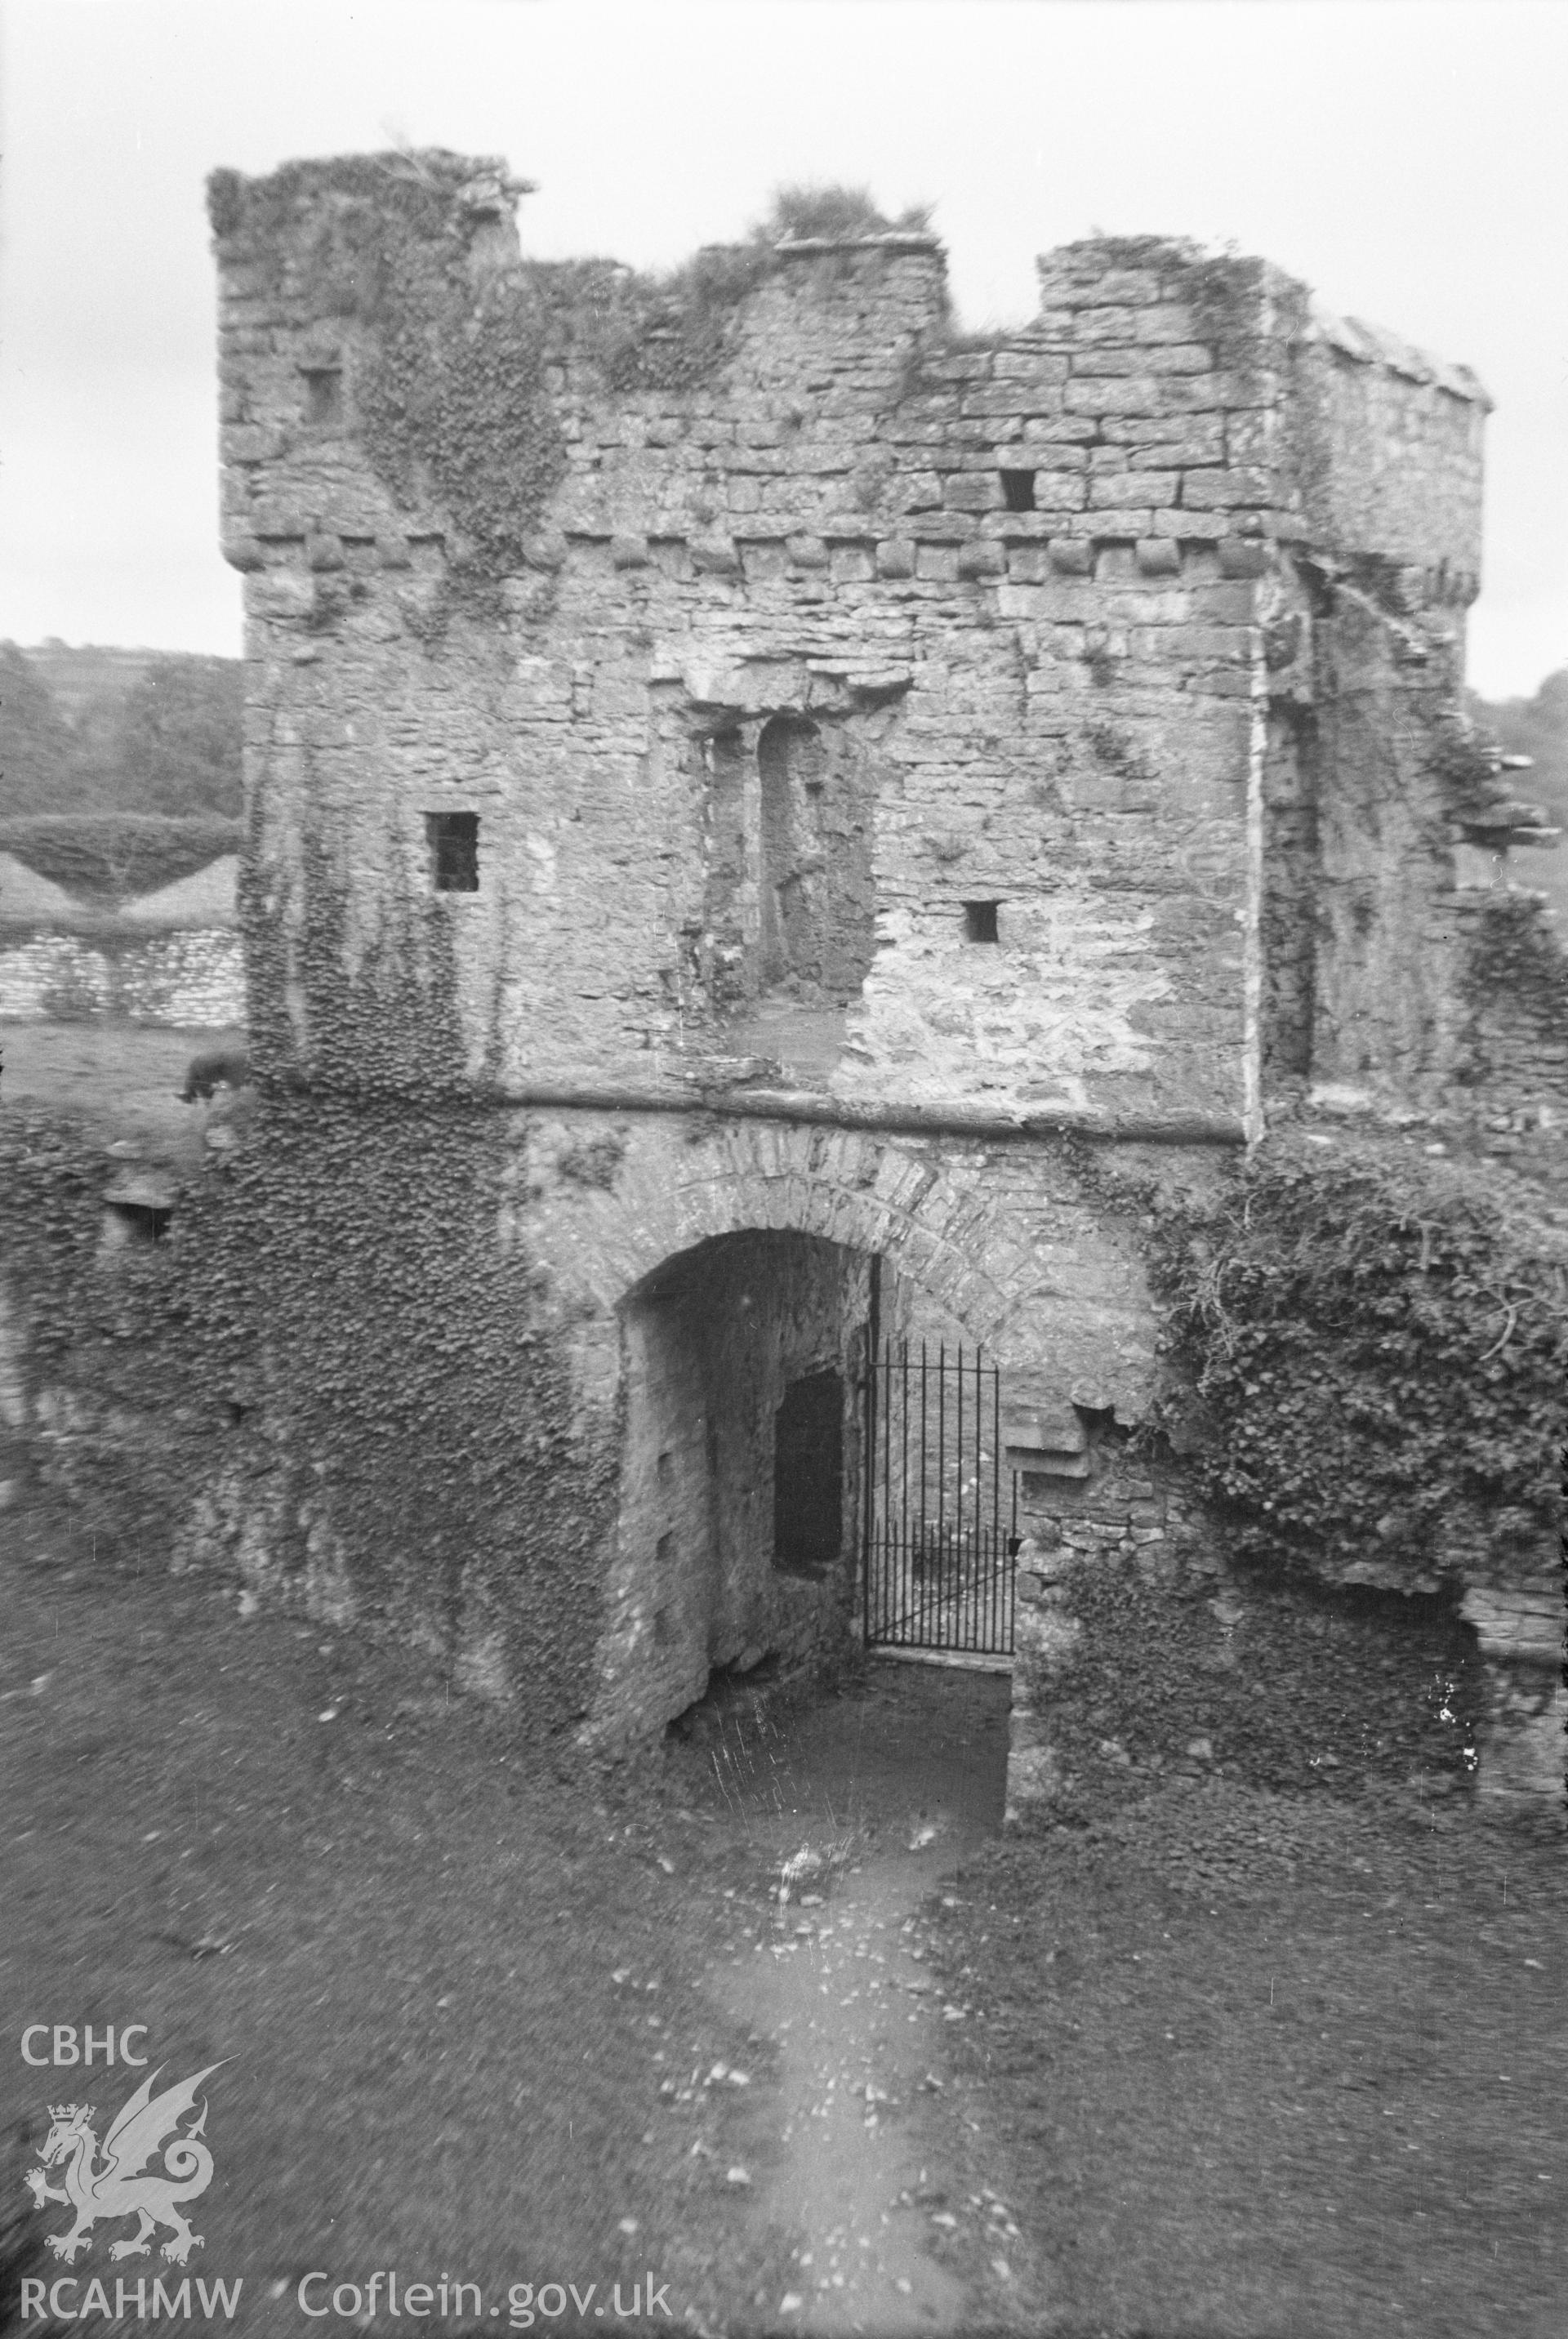 Digital copy of a nitrate negative showing view of Carew Castle.